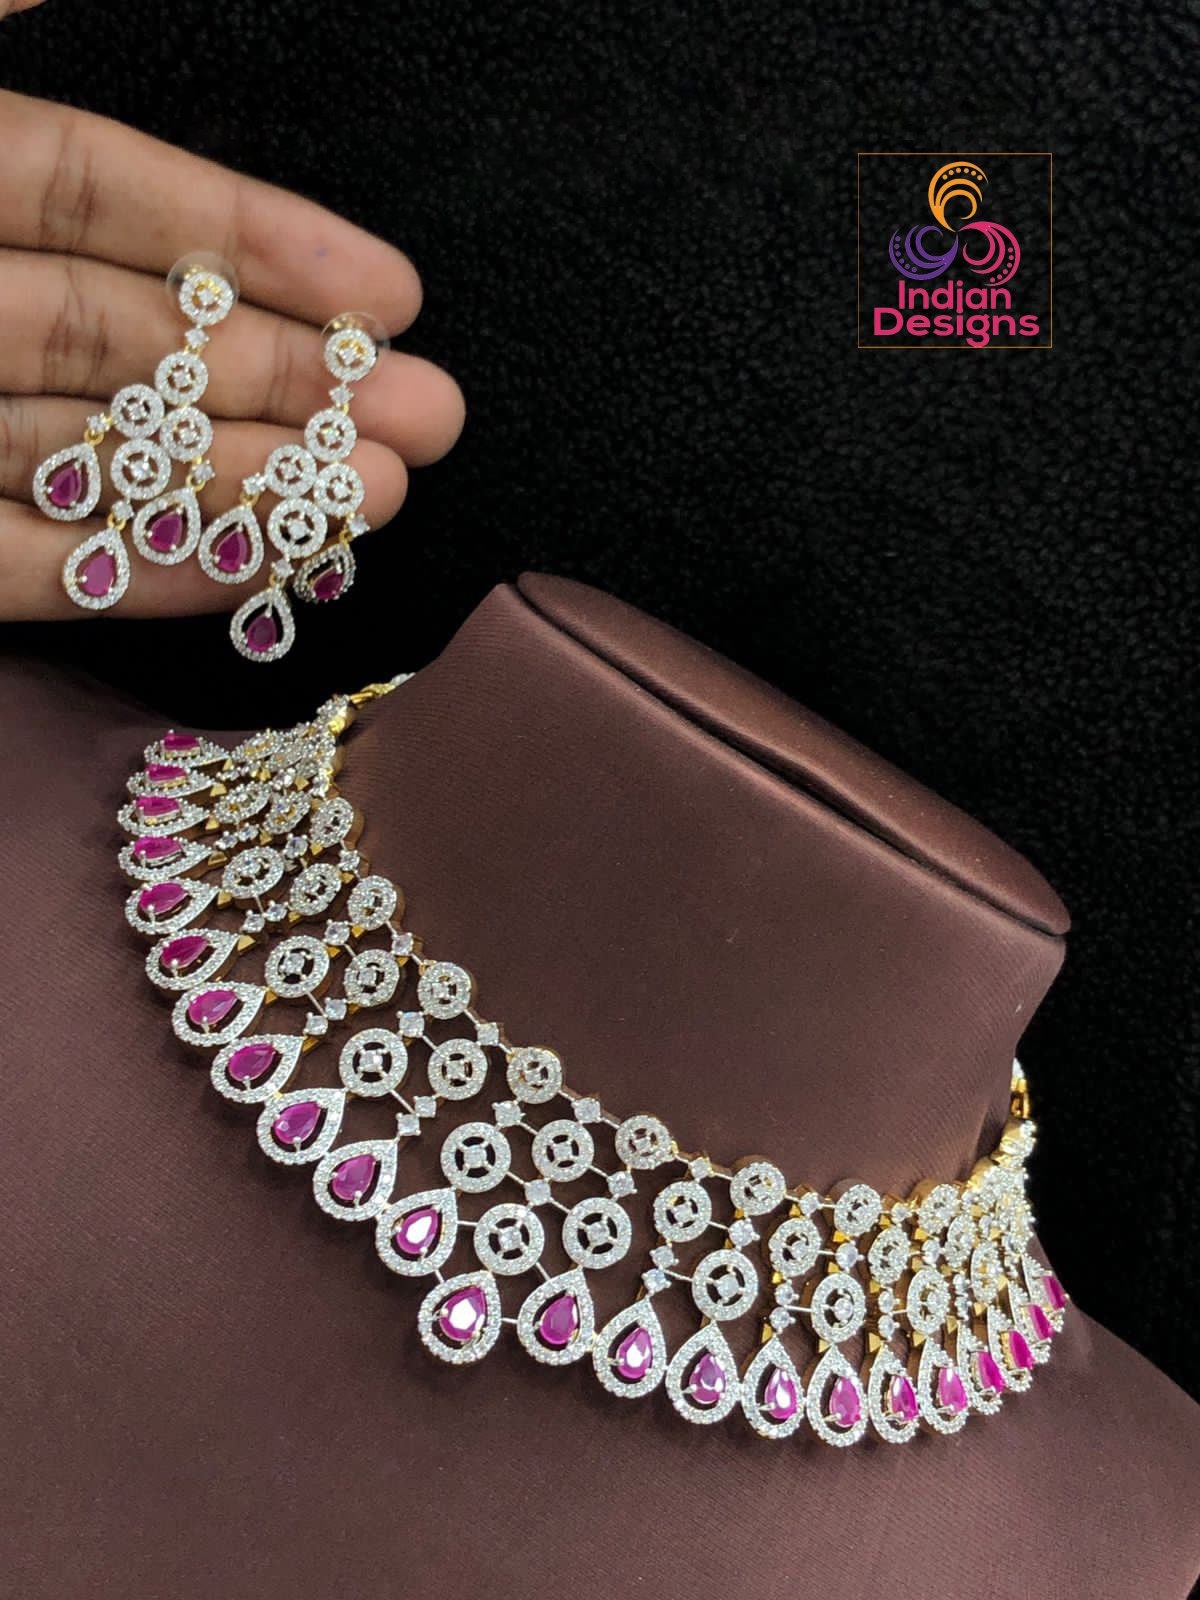 Sparkling Crystal Bridal Bridal Jewellery Set Silver With Silver Diamonds  Available Includes Necklace, Dangle Earrings, And Statement Necklaces  Perfect For Brides And Bridemaids From Commo_dpp, $3.63 | DHgate.Com